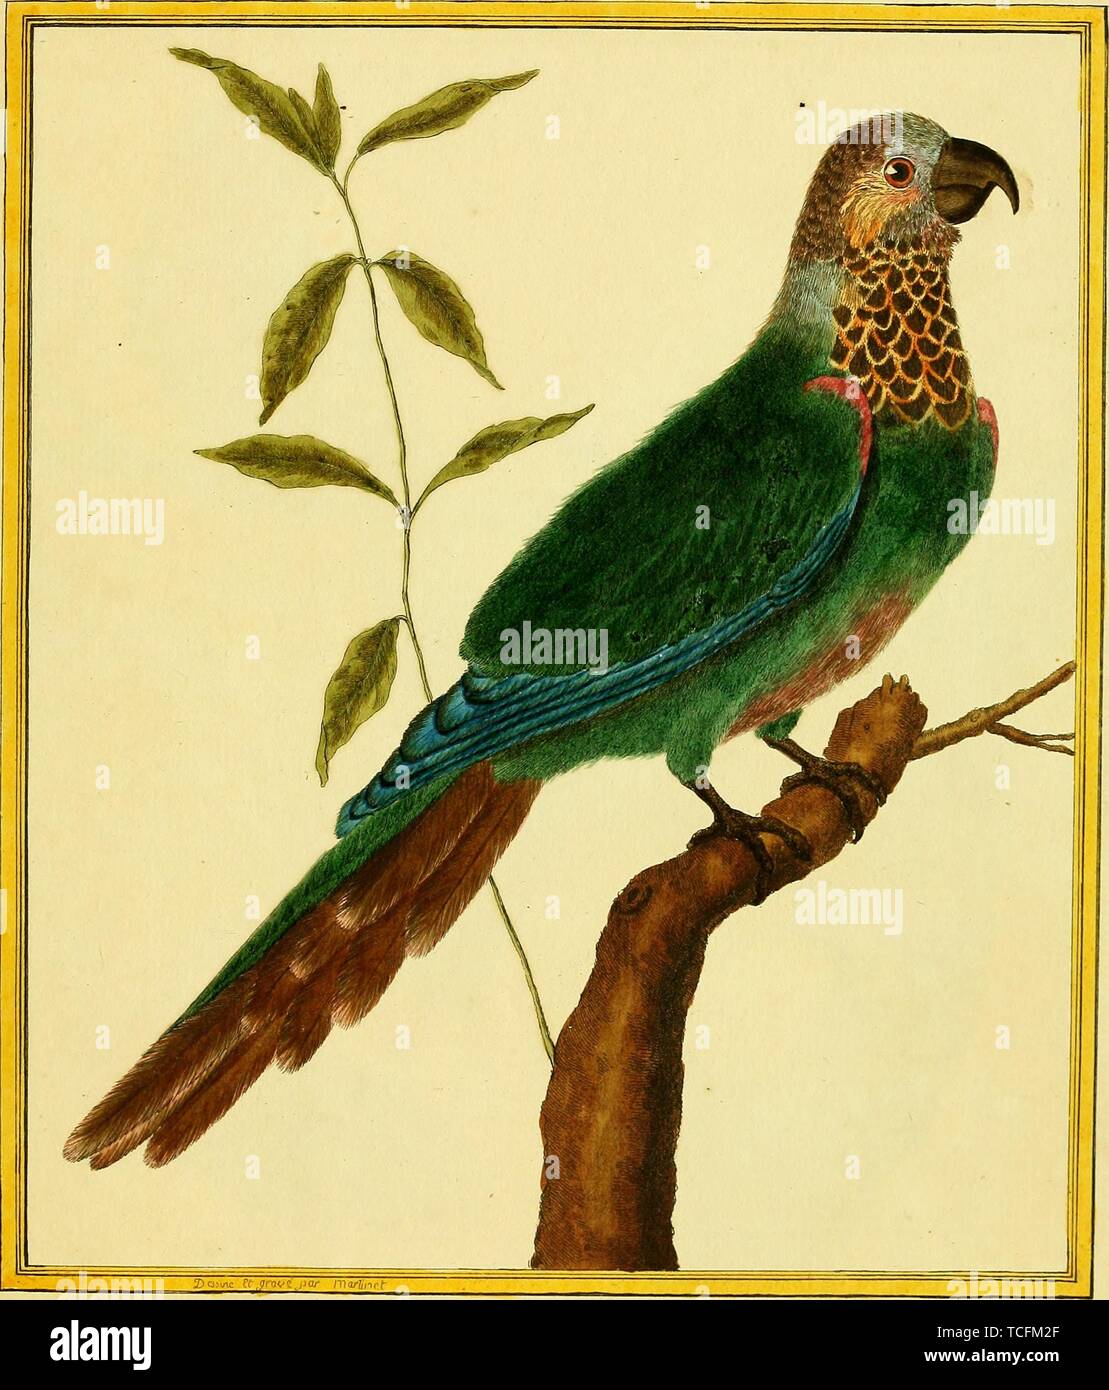 Engraved drawing of the Brown-throated Parakeet (Eupsittula pertinax), from the book 'Planches enluminees Dhistoire naturelle' by Francois Nicolas, Louis Jean Marie Daubenton, and Edme-Louis Daubenton, 1765. Courtesy Internet Archive. () Stock Photo